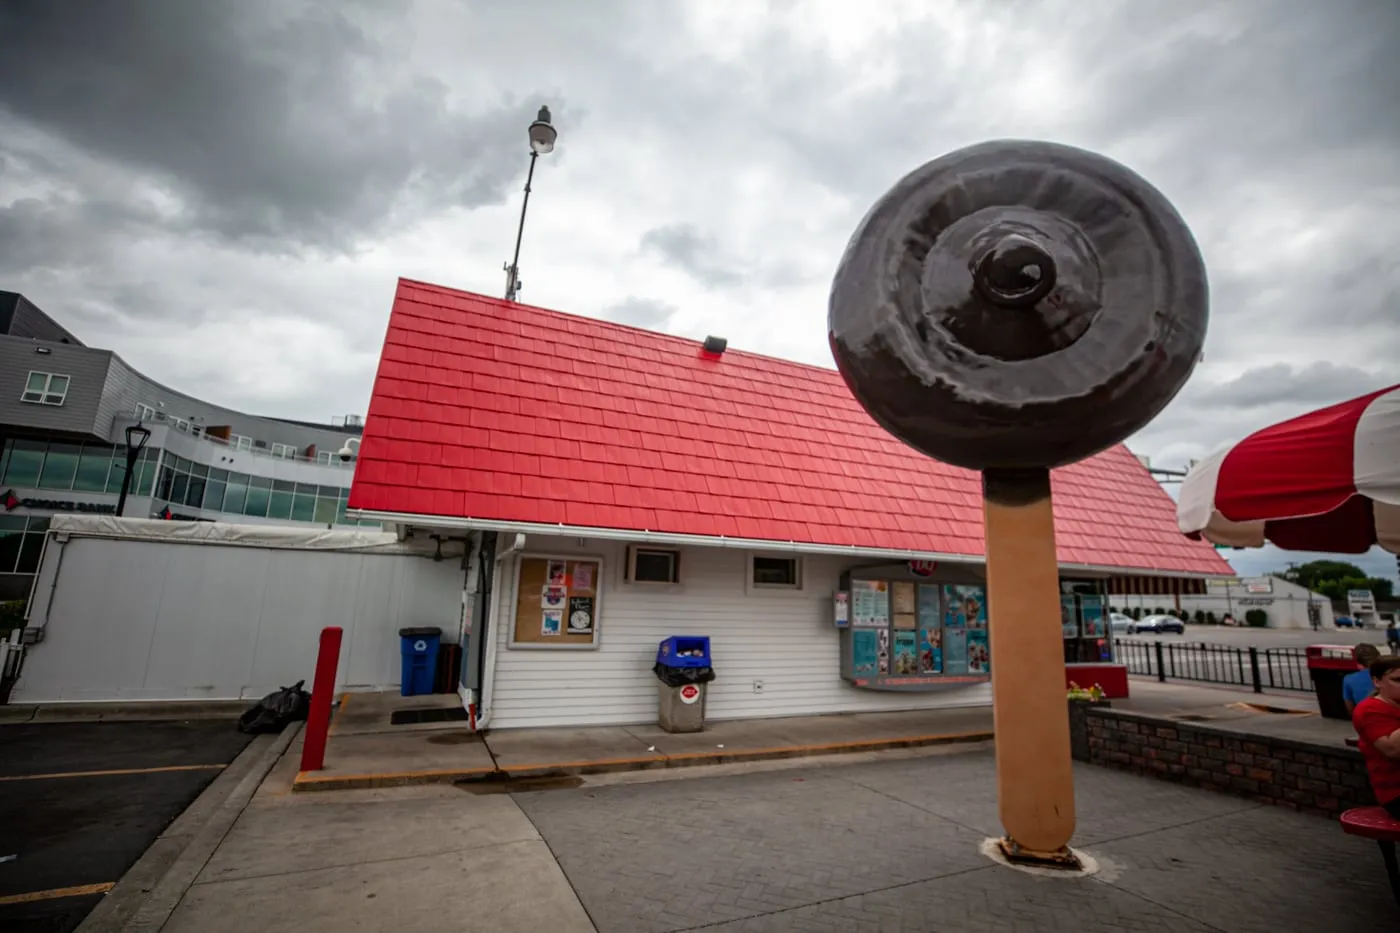 World's Largest Dilly Bar Ice Cream at the Dairy Queen in Moorhead, Minnesota | Minnesota Roadside Attractions